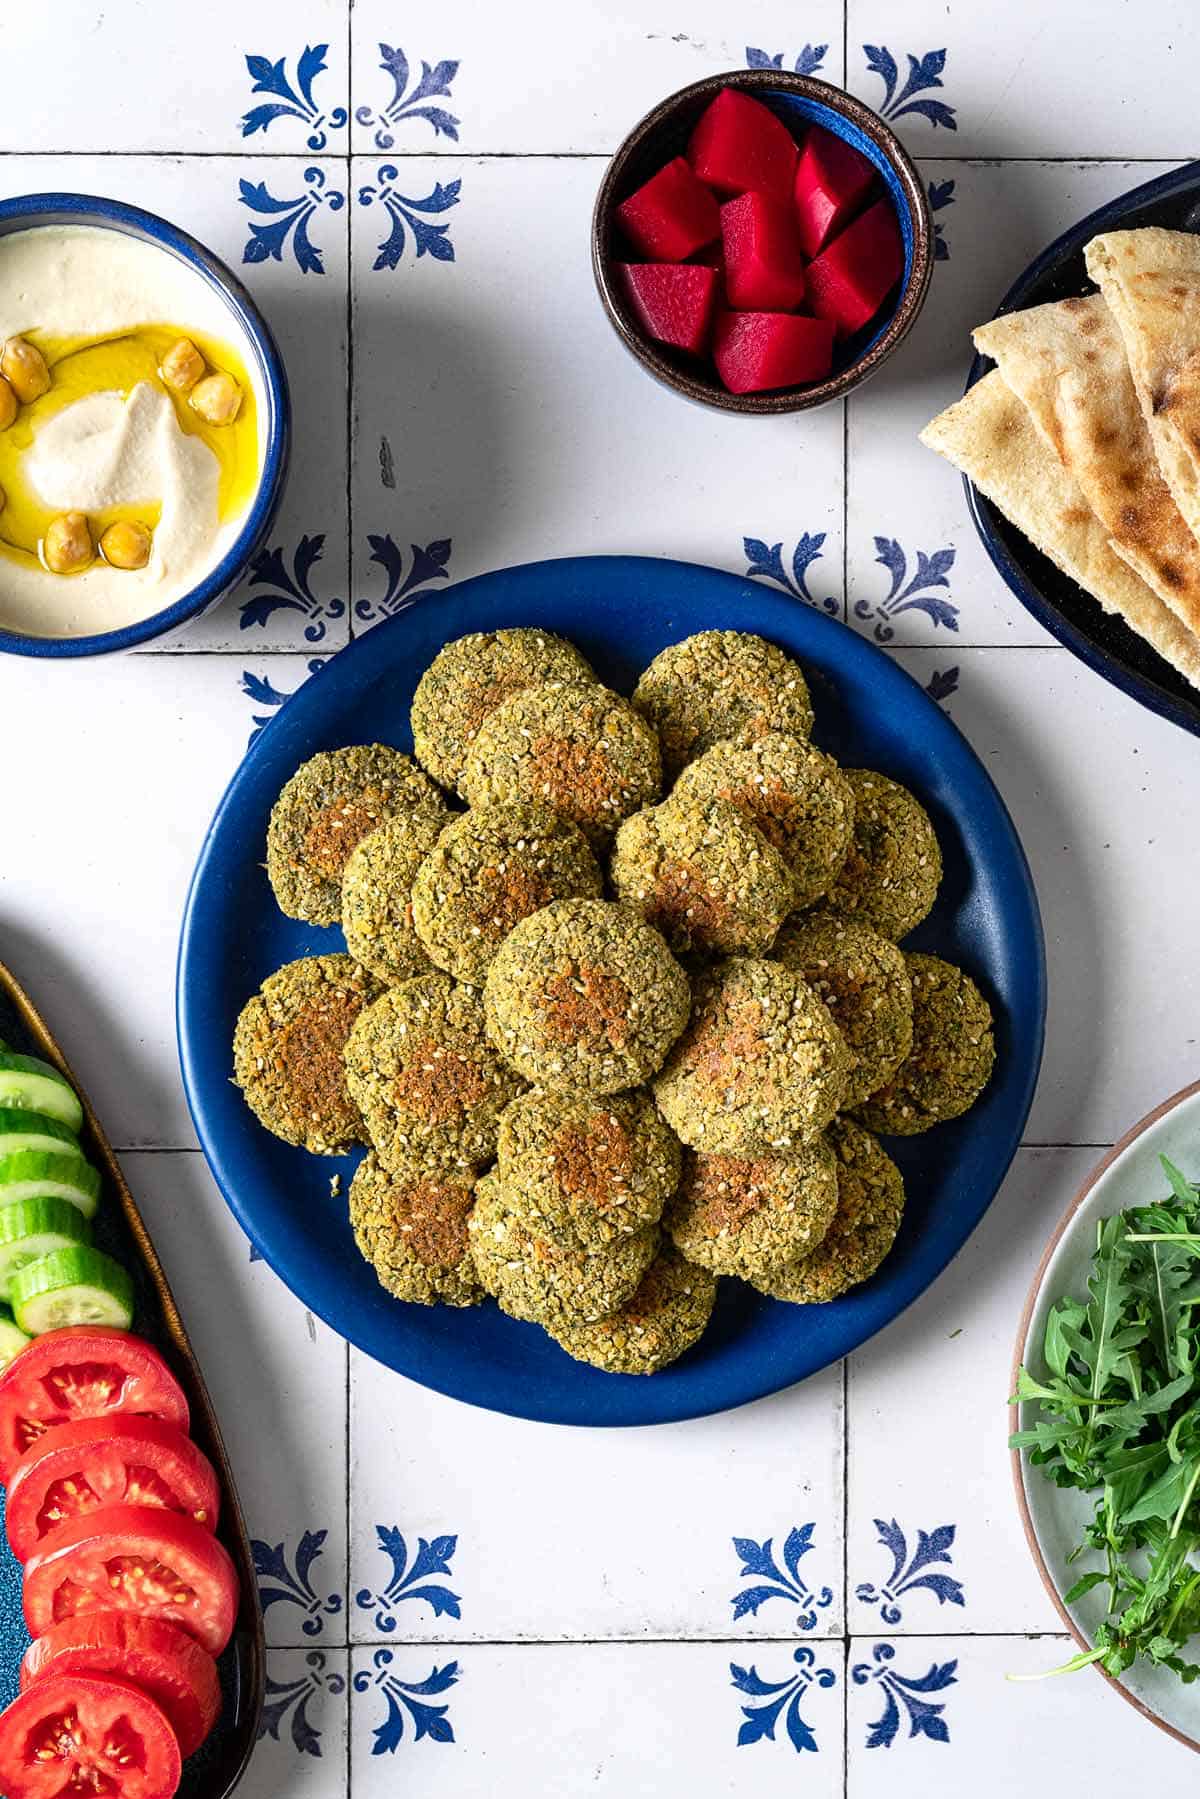 overhead photo of a blue plate full of baked falafel surrounded by a plate of cucumbers and tomatoes, a bowl of hummus, a bowl of pickled turnips, a plate of pita and a bowl of arugula.